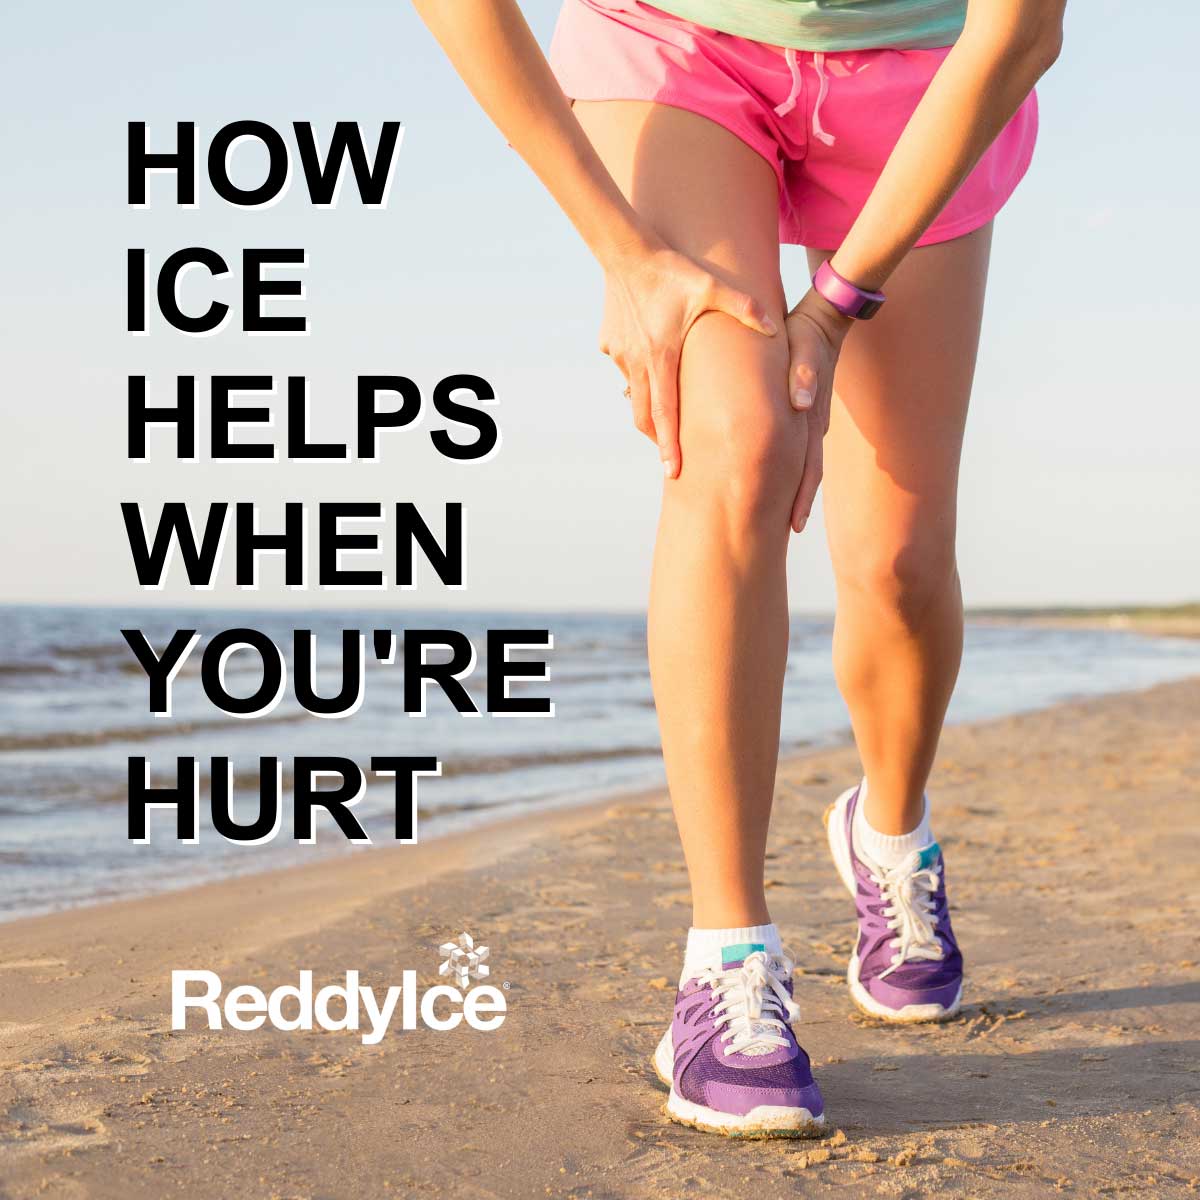 How to Ice an Injury